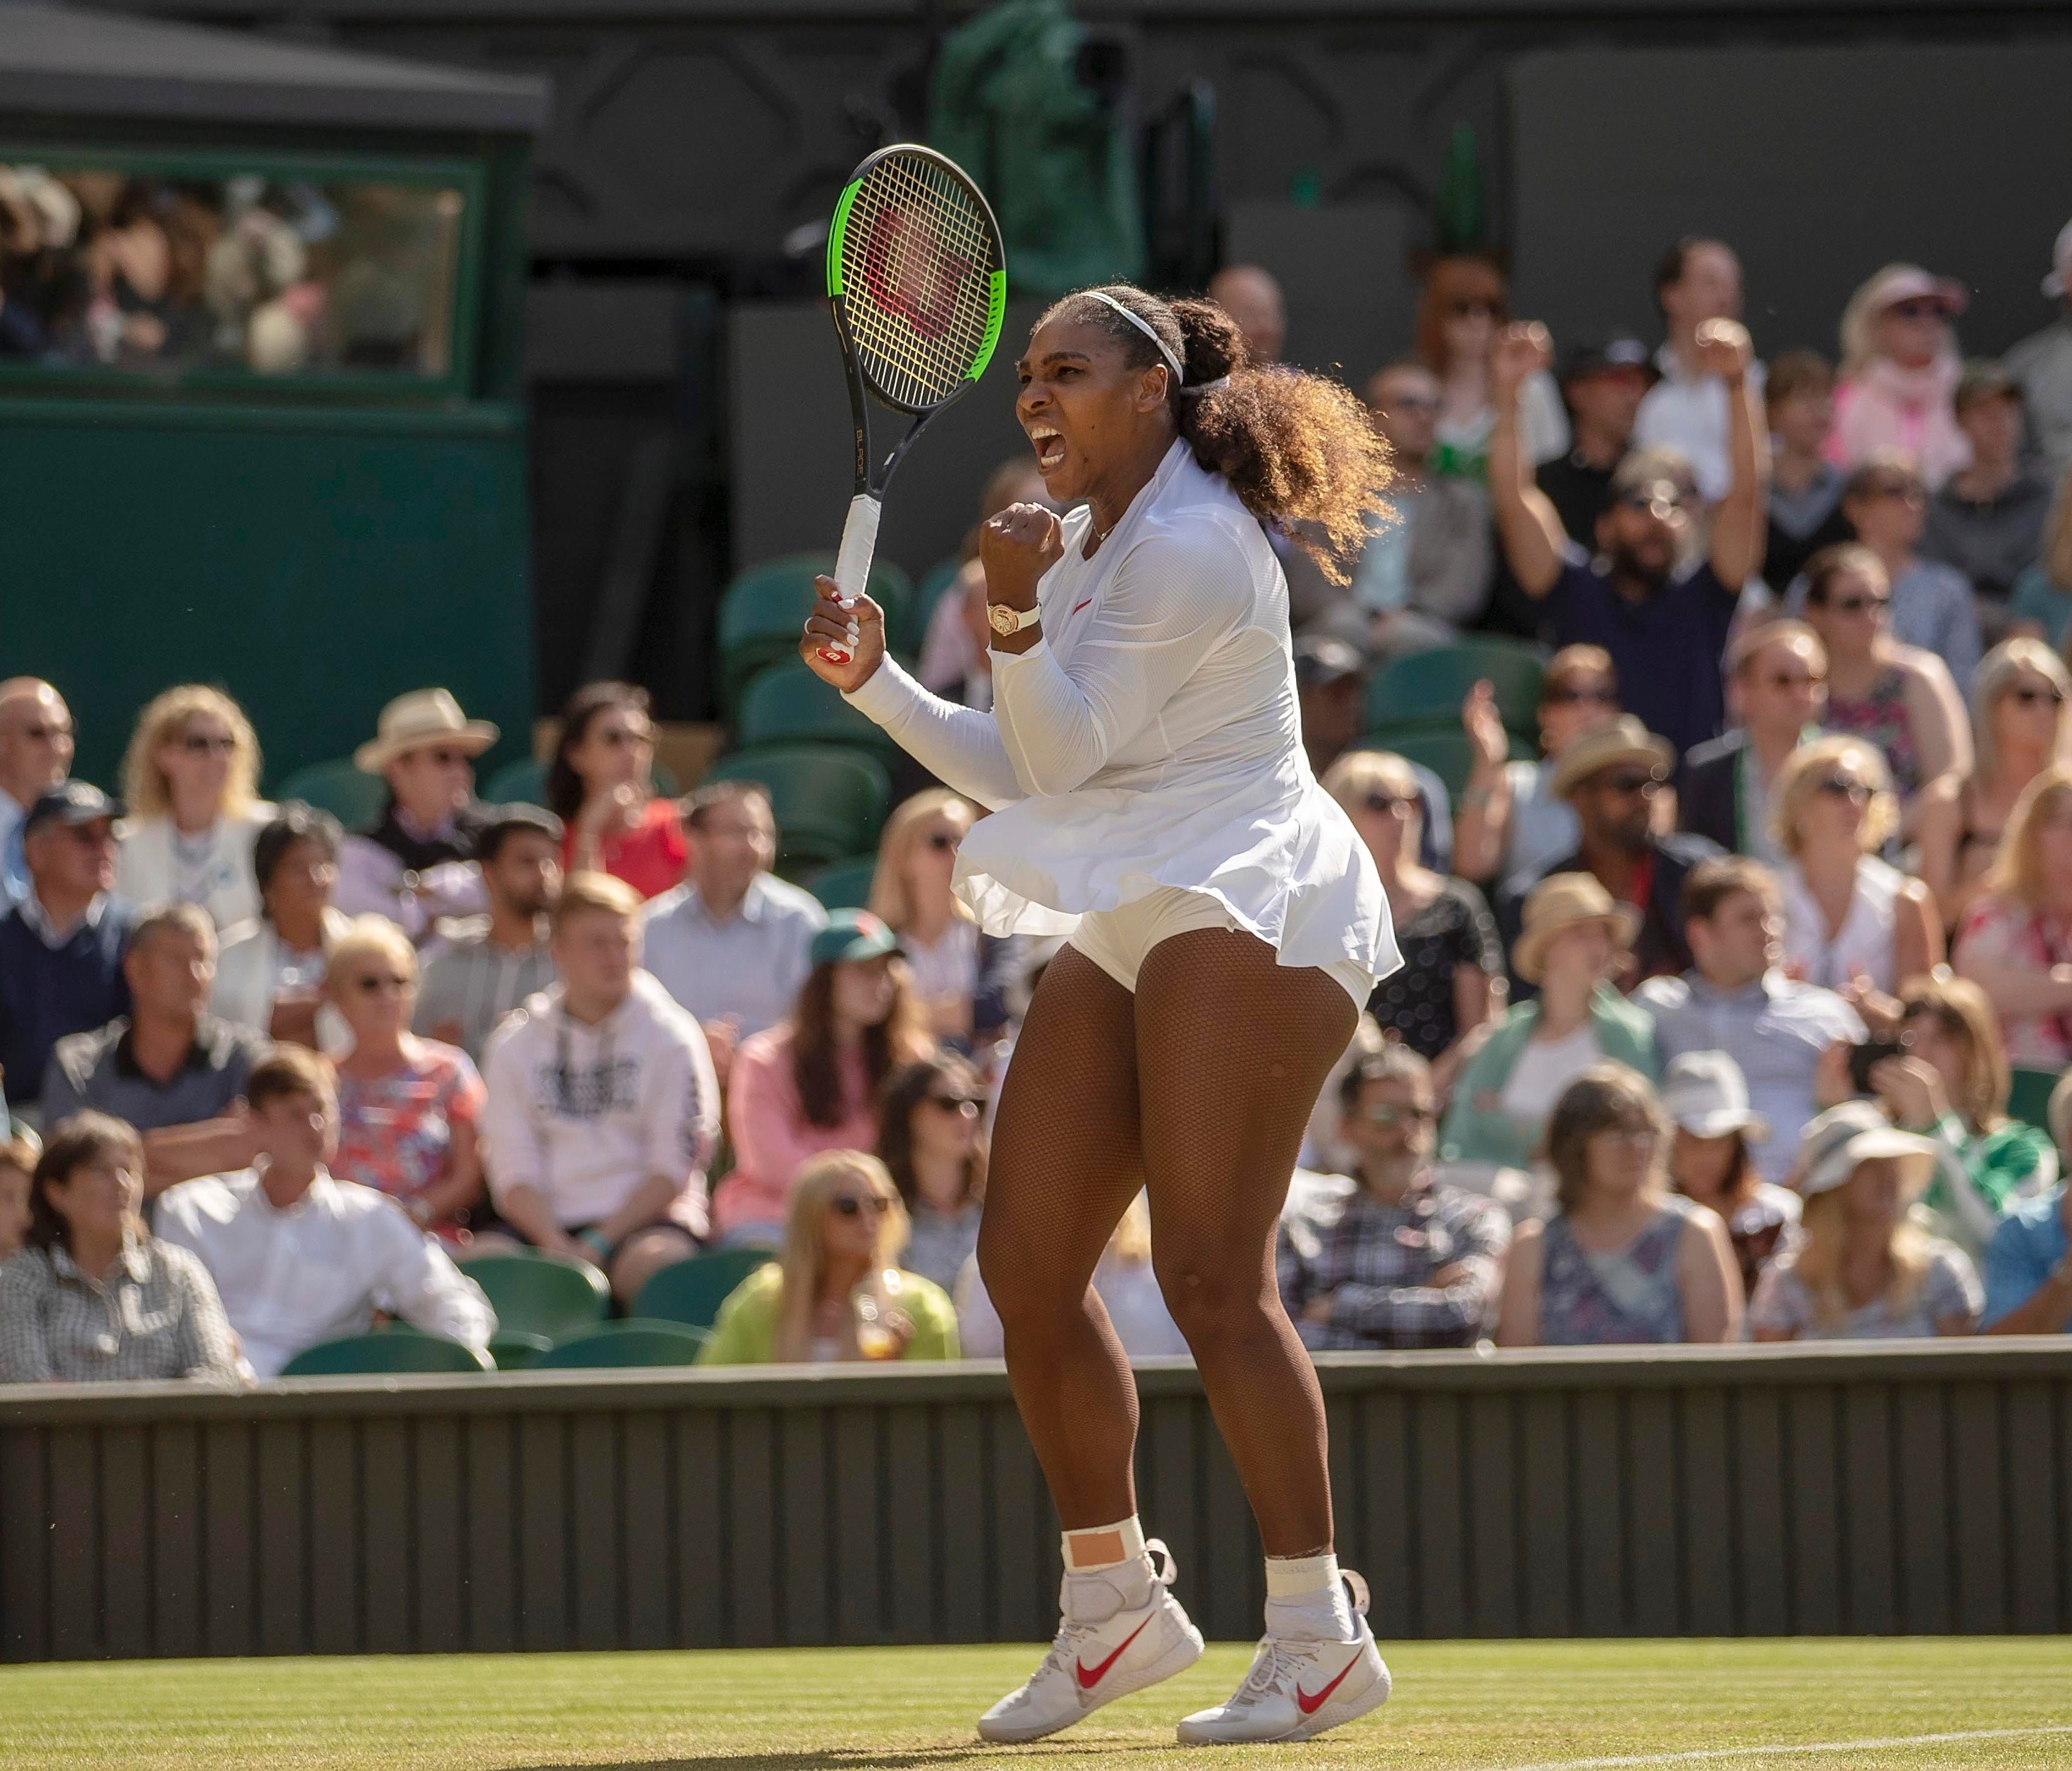 Serena Williams of the US reacts during her match against Camila Giorgi of Italy on day eight at All England Lawn and Croquet Club.